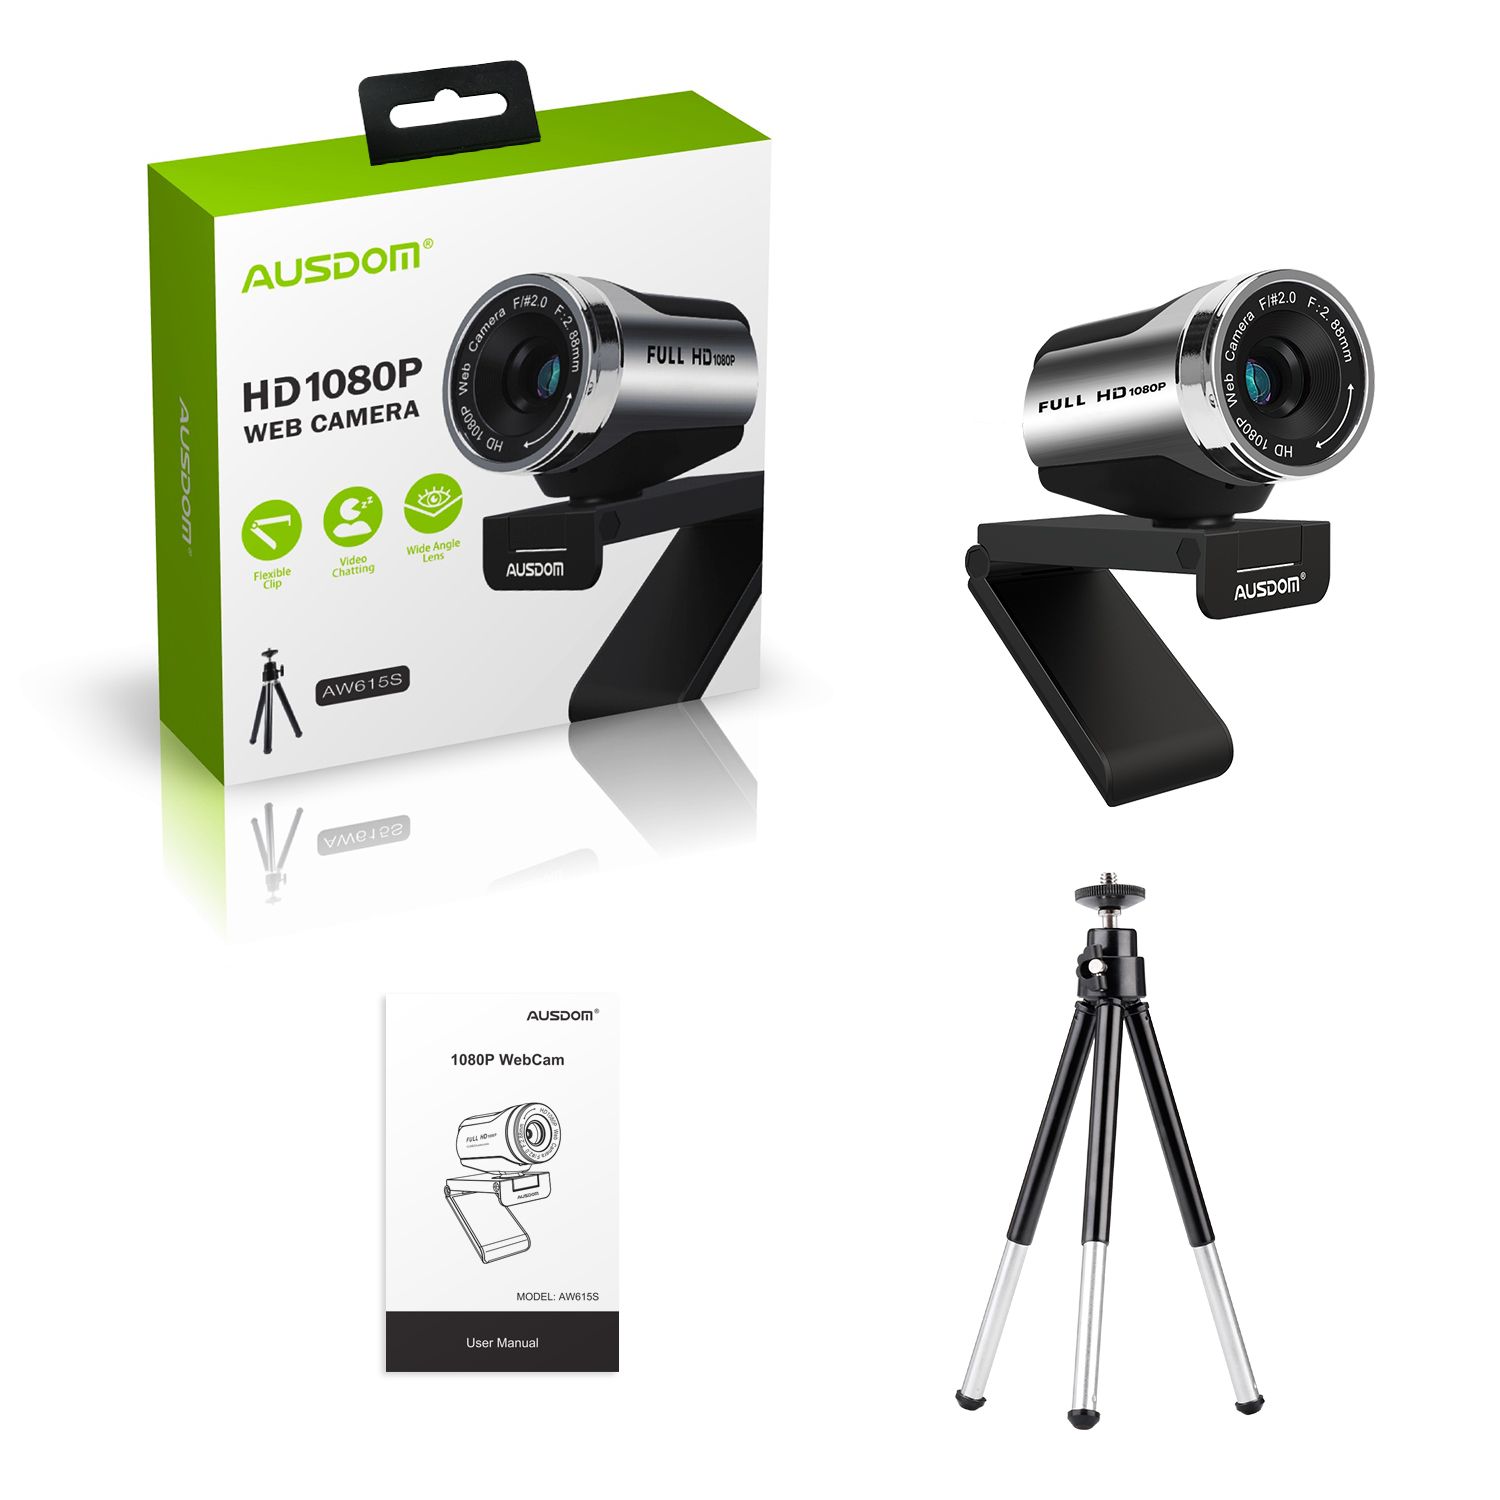 Full HD 1080P Wide Angle View Webcam with Anti-distortion, AUSDOM AW61